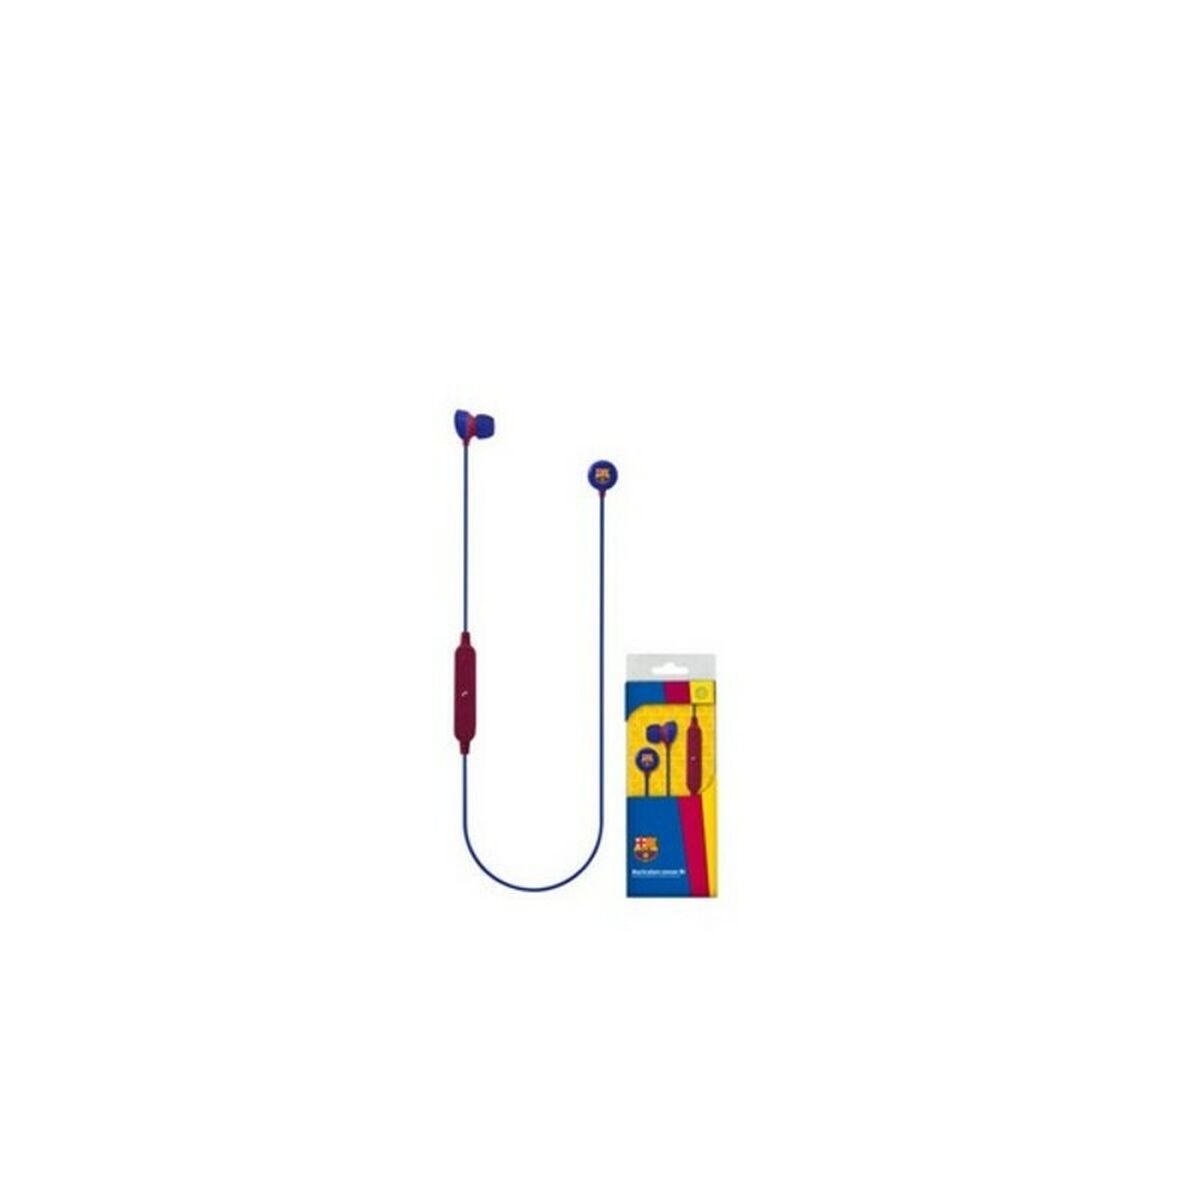 Bluetooth Sports Headset with Microphone F.C. Barcelona Blue